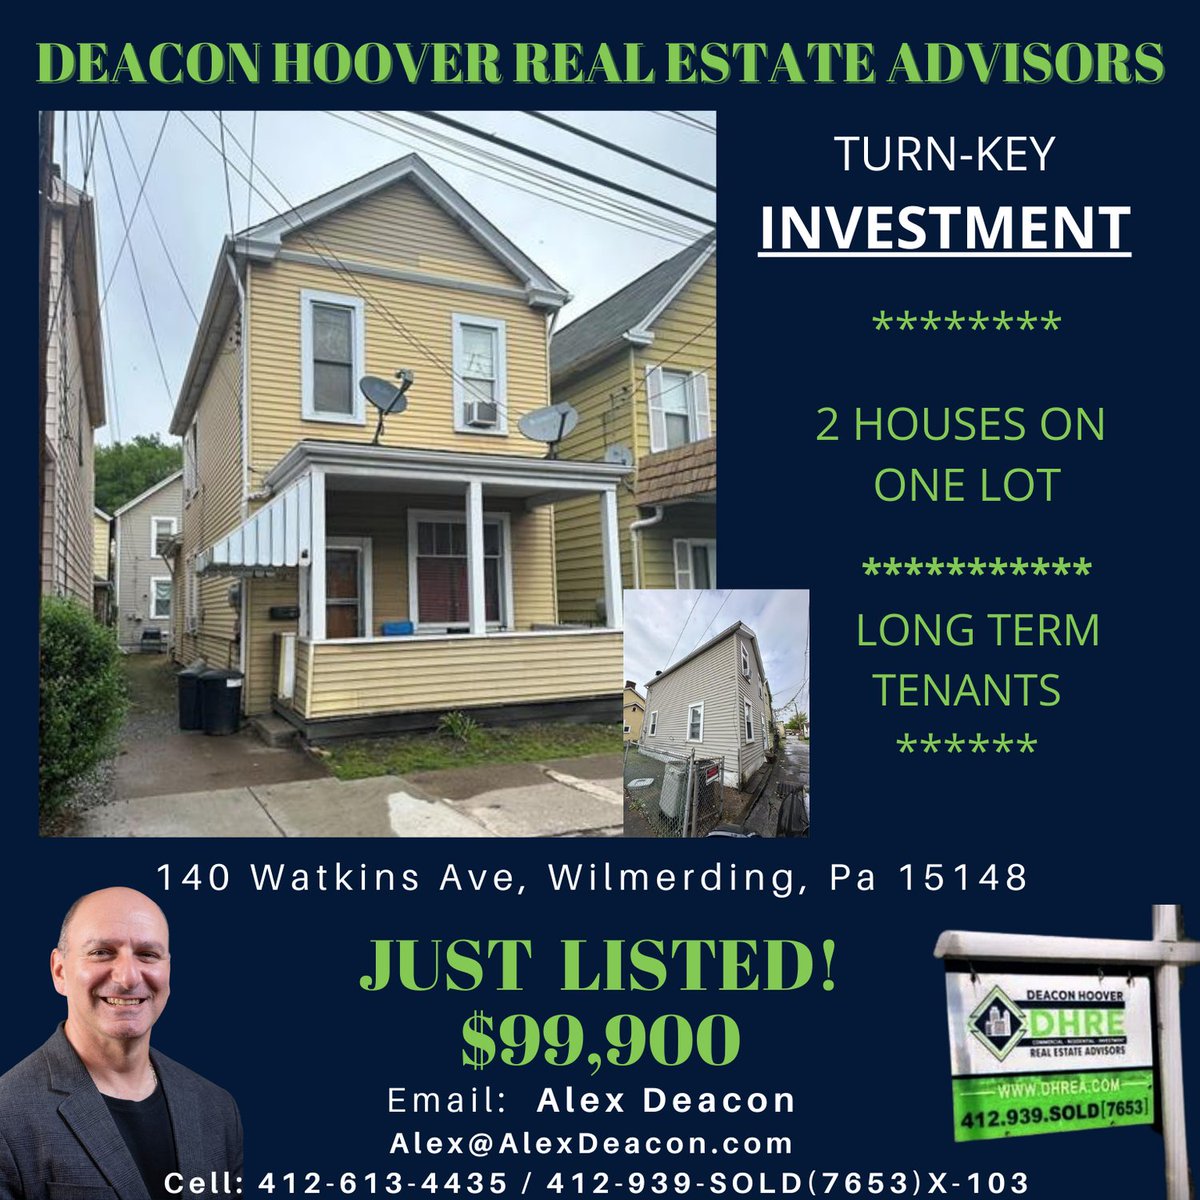 JUST LISTED! $99,900
Solid Investment Property with Good Cash Flow. 
#DHRE #deaconhoover #pittsburghrealestate #forrent #forlease #pittsburghrealtor #buying #selling #investing #listing #leasing #pittsburghrealty #apartmentforrent #houseforrent